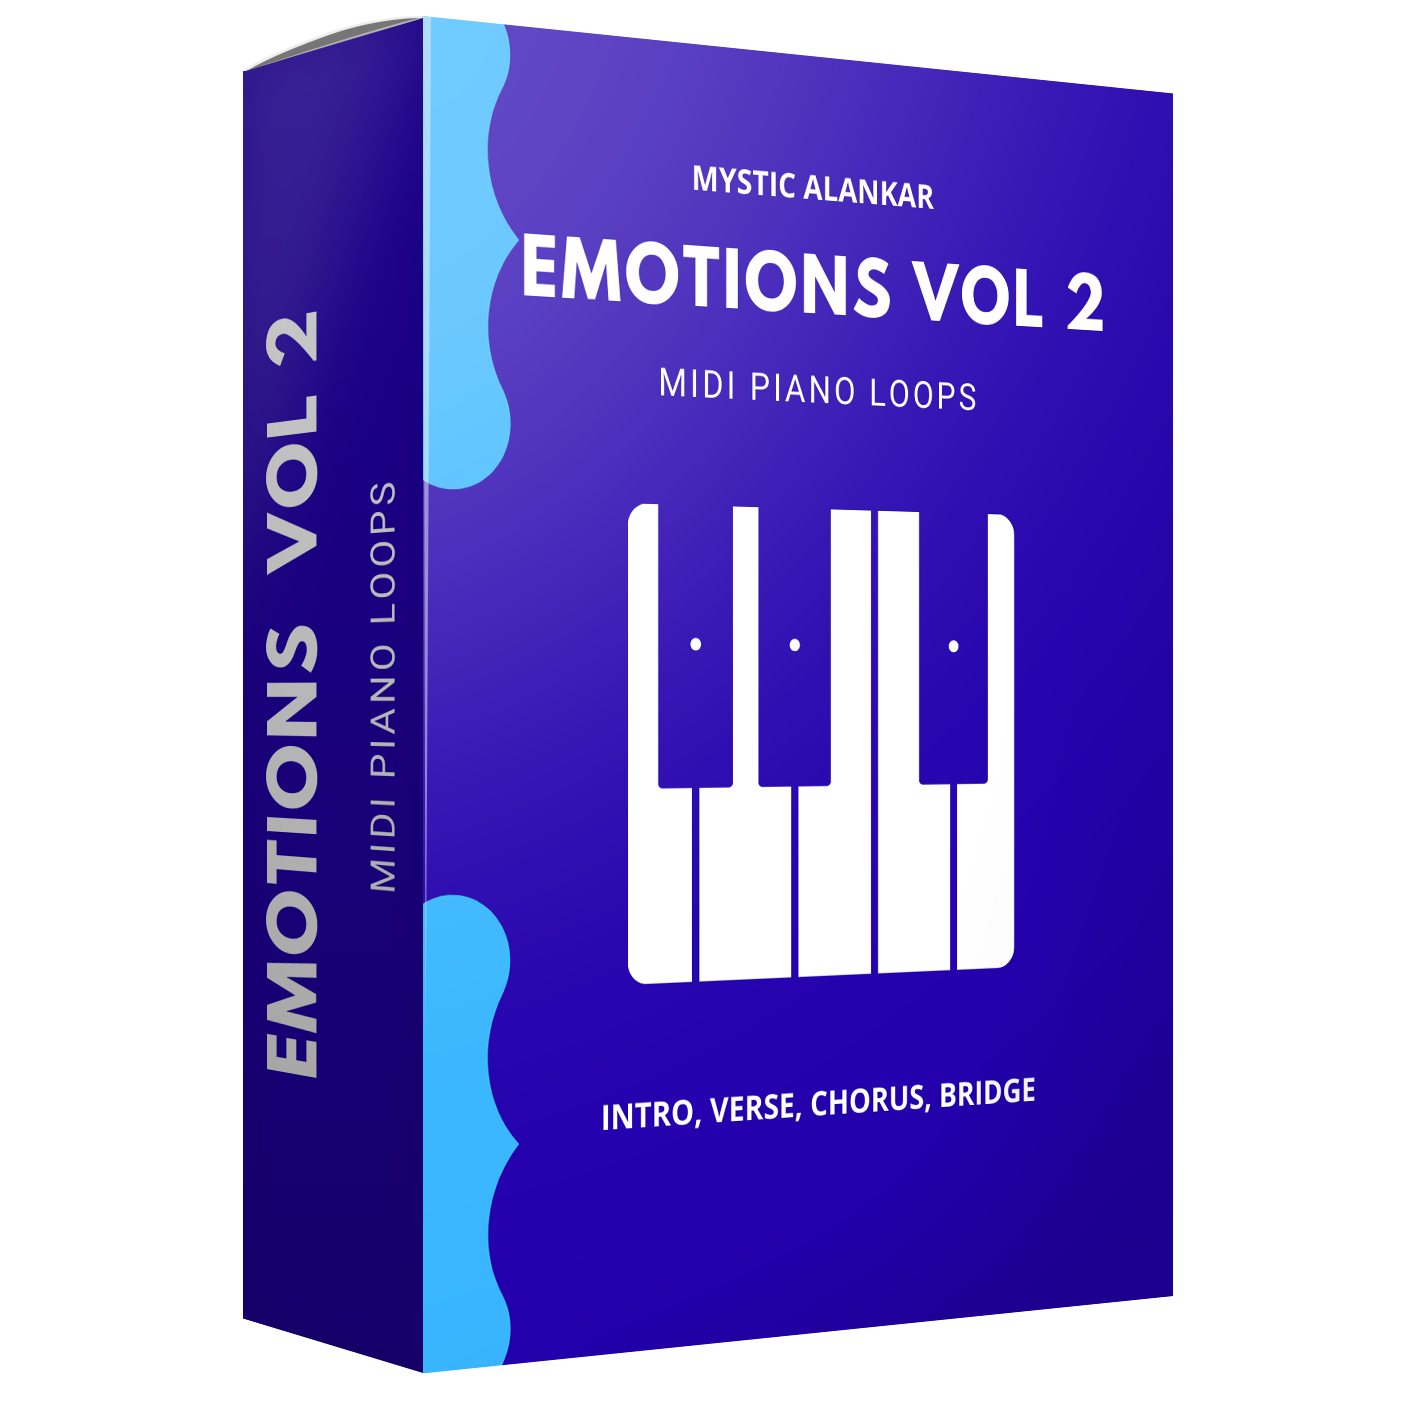 emotional piano loops in midi format for pop ballads and slow songs - Music production sample pack